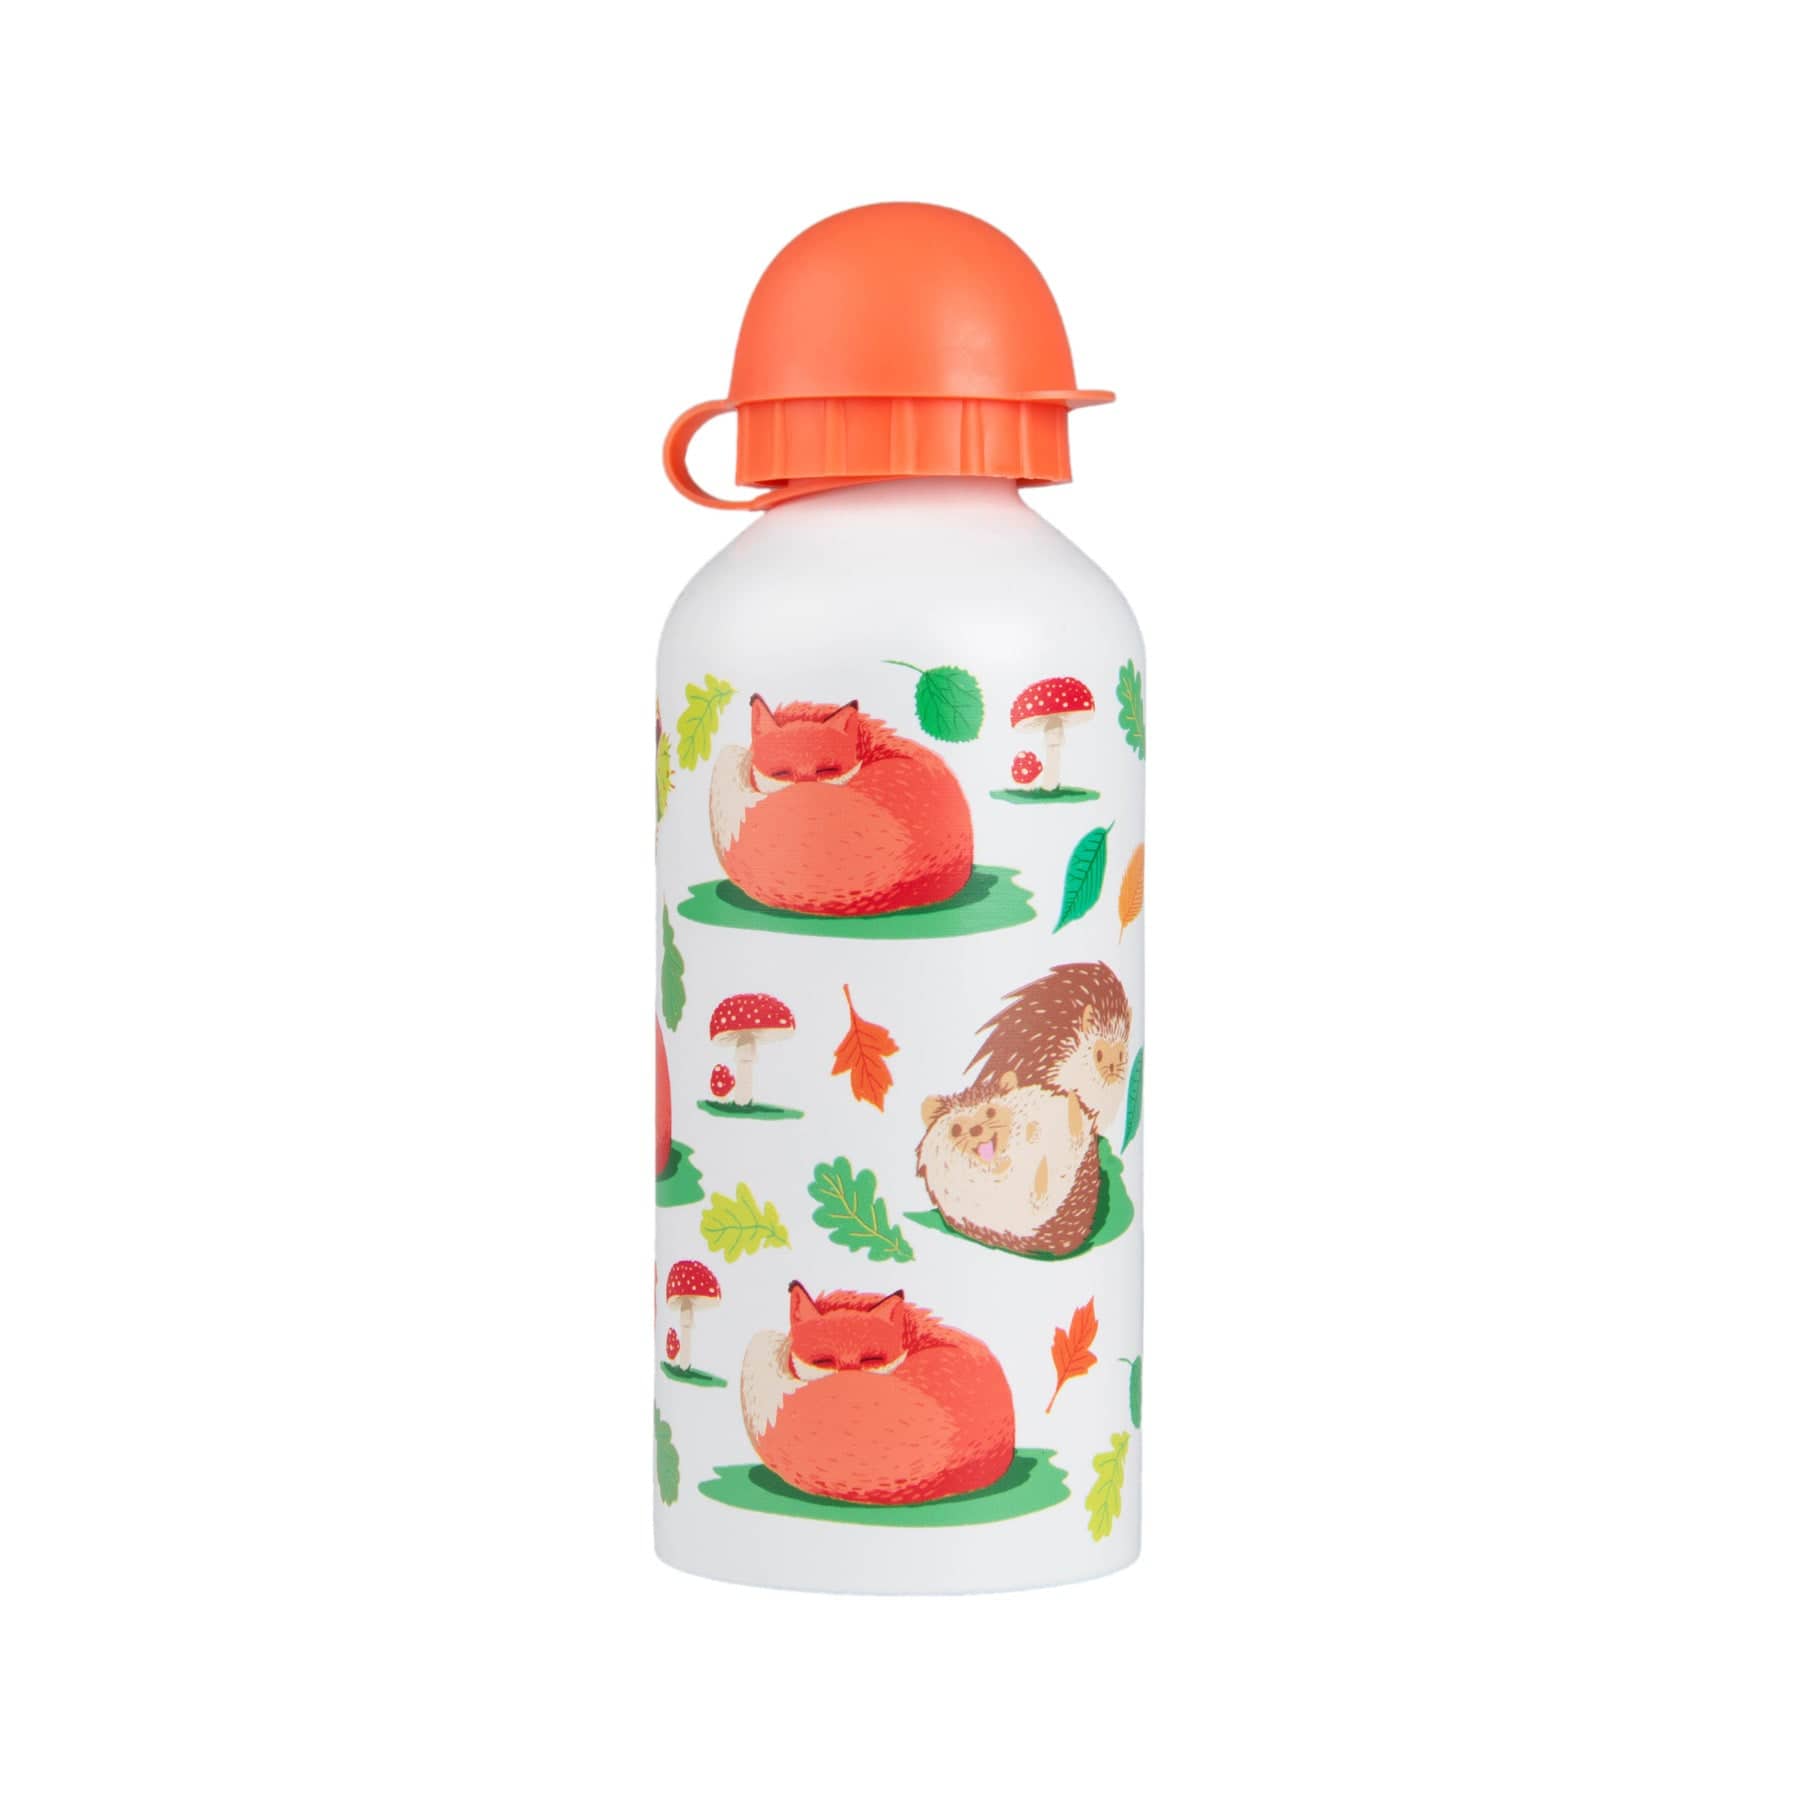 Reusable white water bottle with cute fox and hedgehog illustrations, surrounded by green leaves and red mushrooms, topped with an orange cap